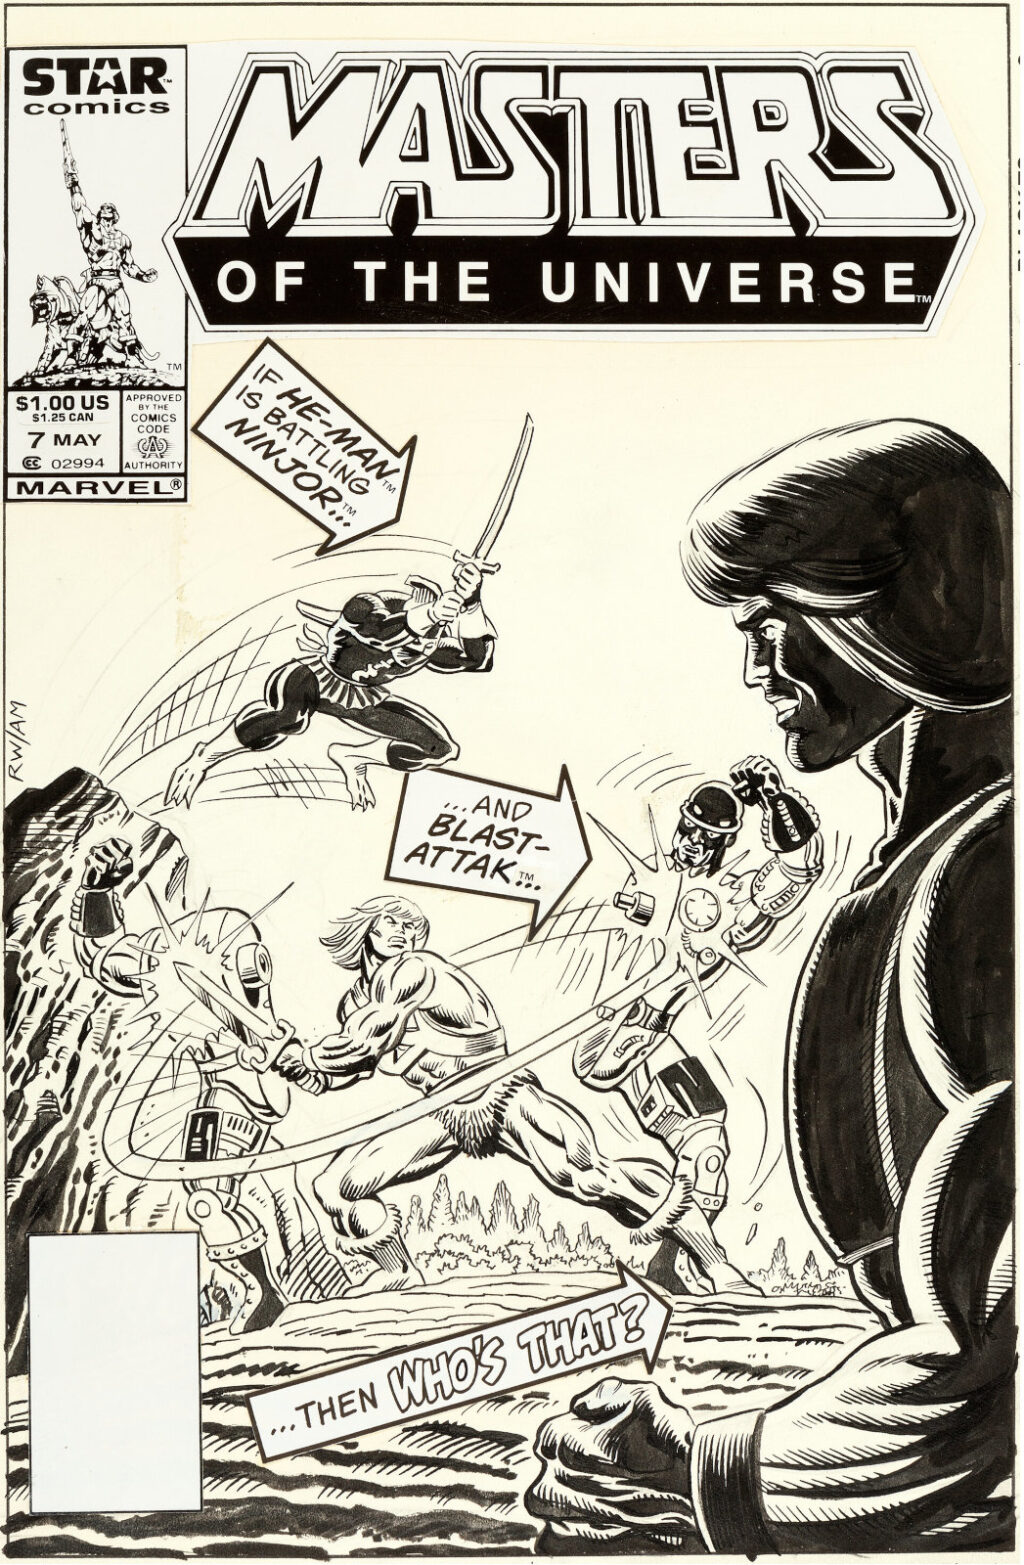 Masters Of The Universe issue 7 cover by George Tuska and Klaus Janson